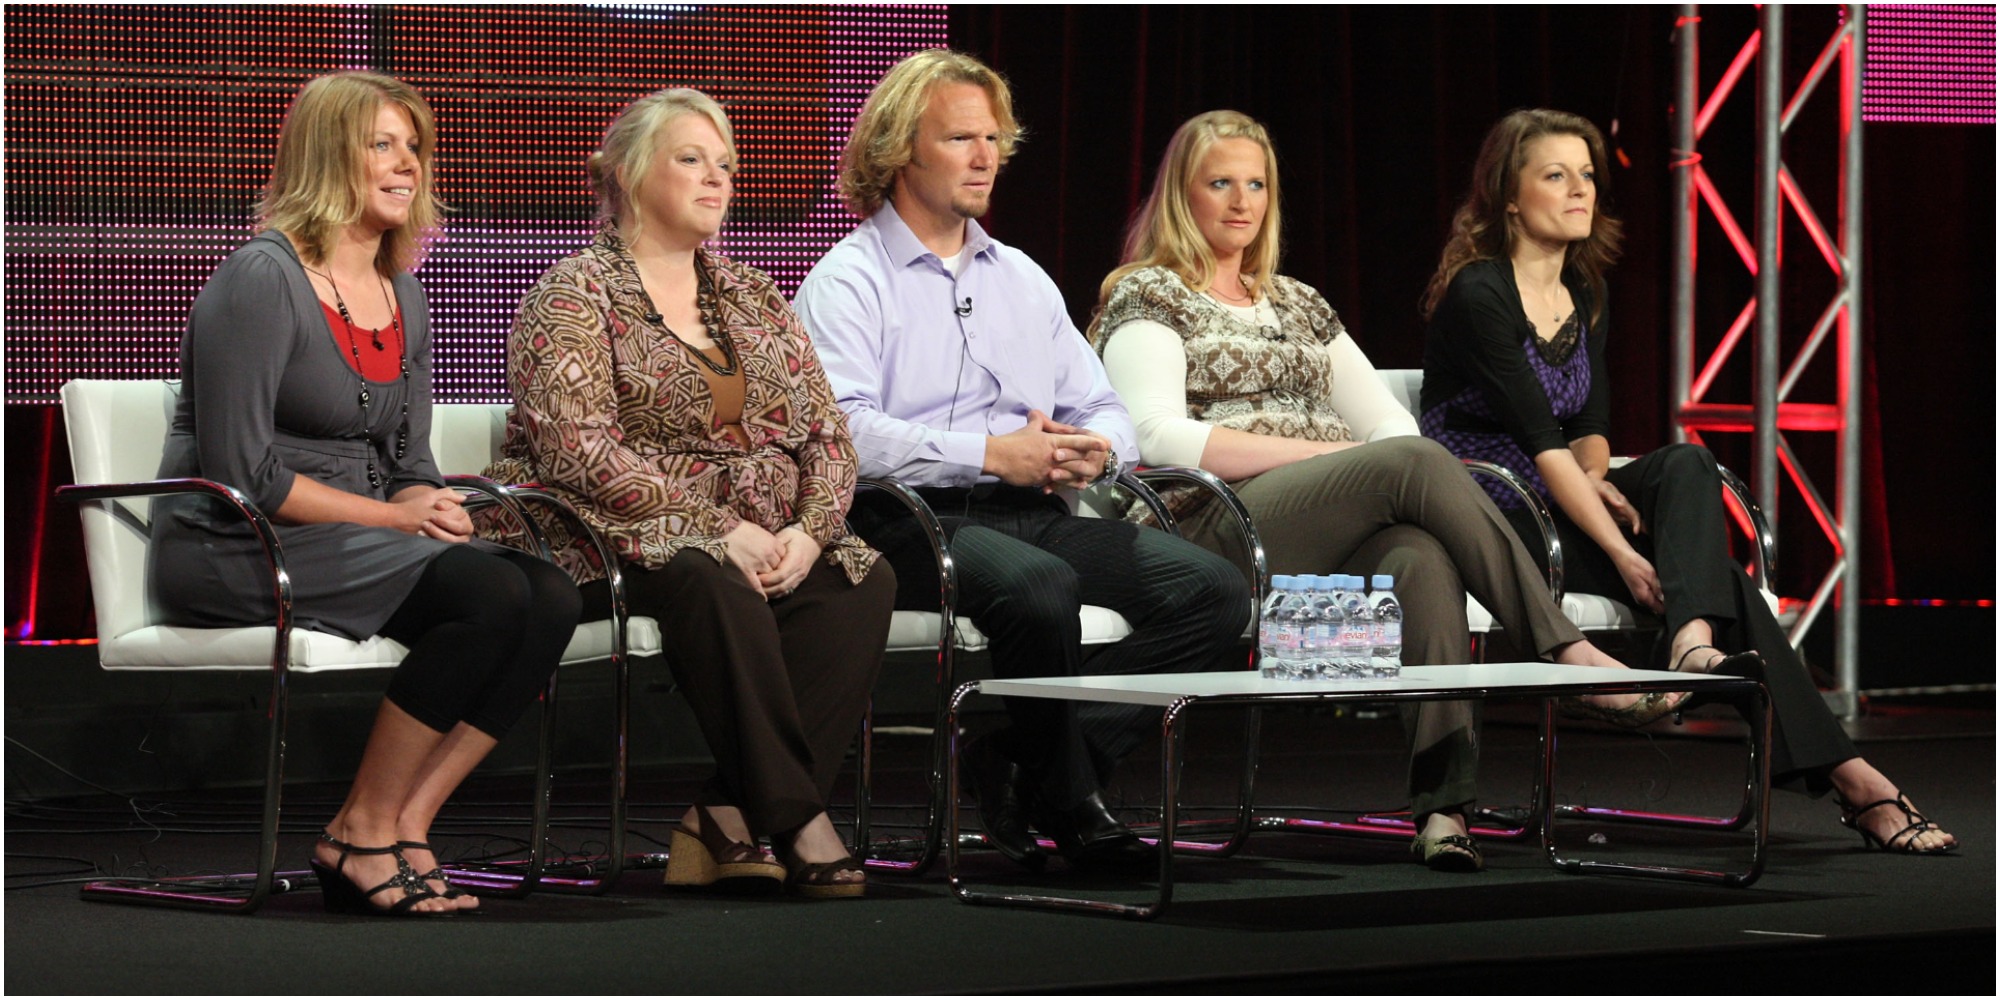 Meri Brown, Janelle Brown, Kody Brown, Christine Brown and Robyn Brown of 'Sister Wives' appear at the 2010 TCA Press Tour